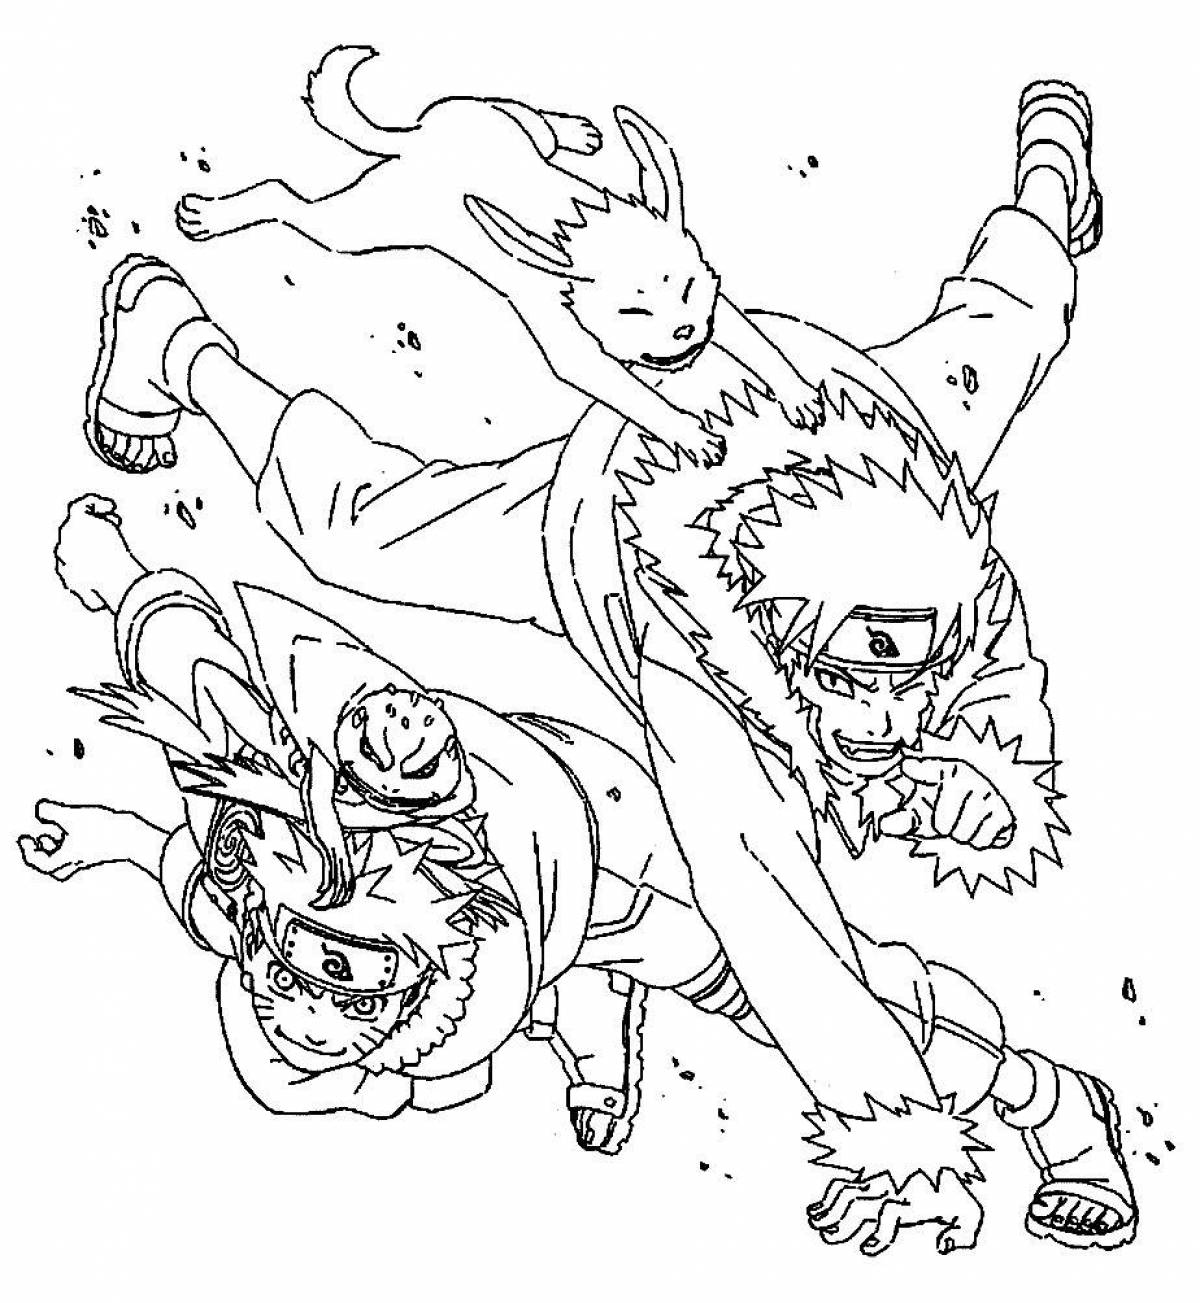 Attractive naruto coloring book for kids